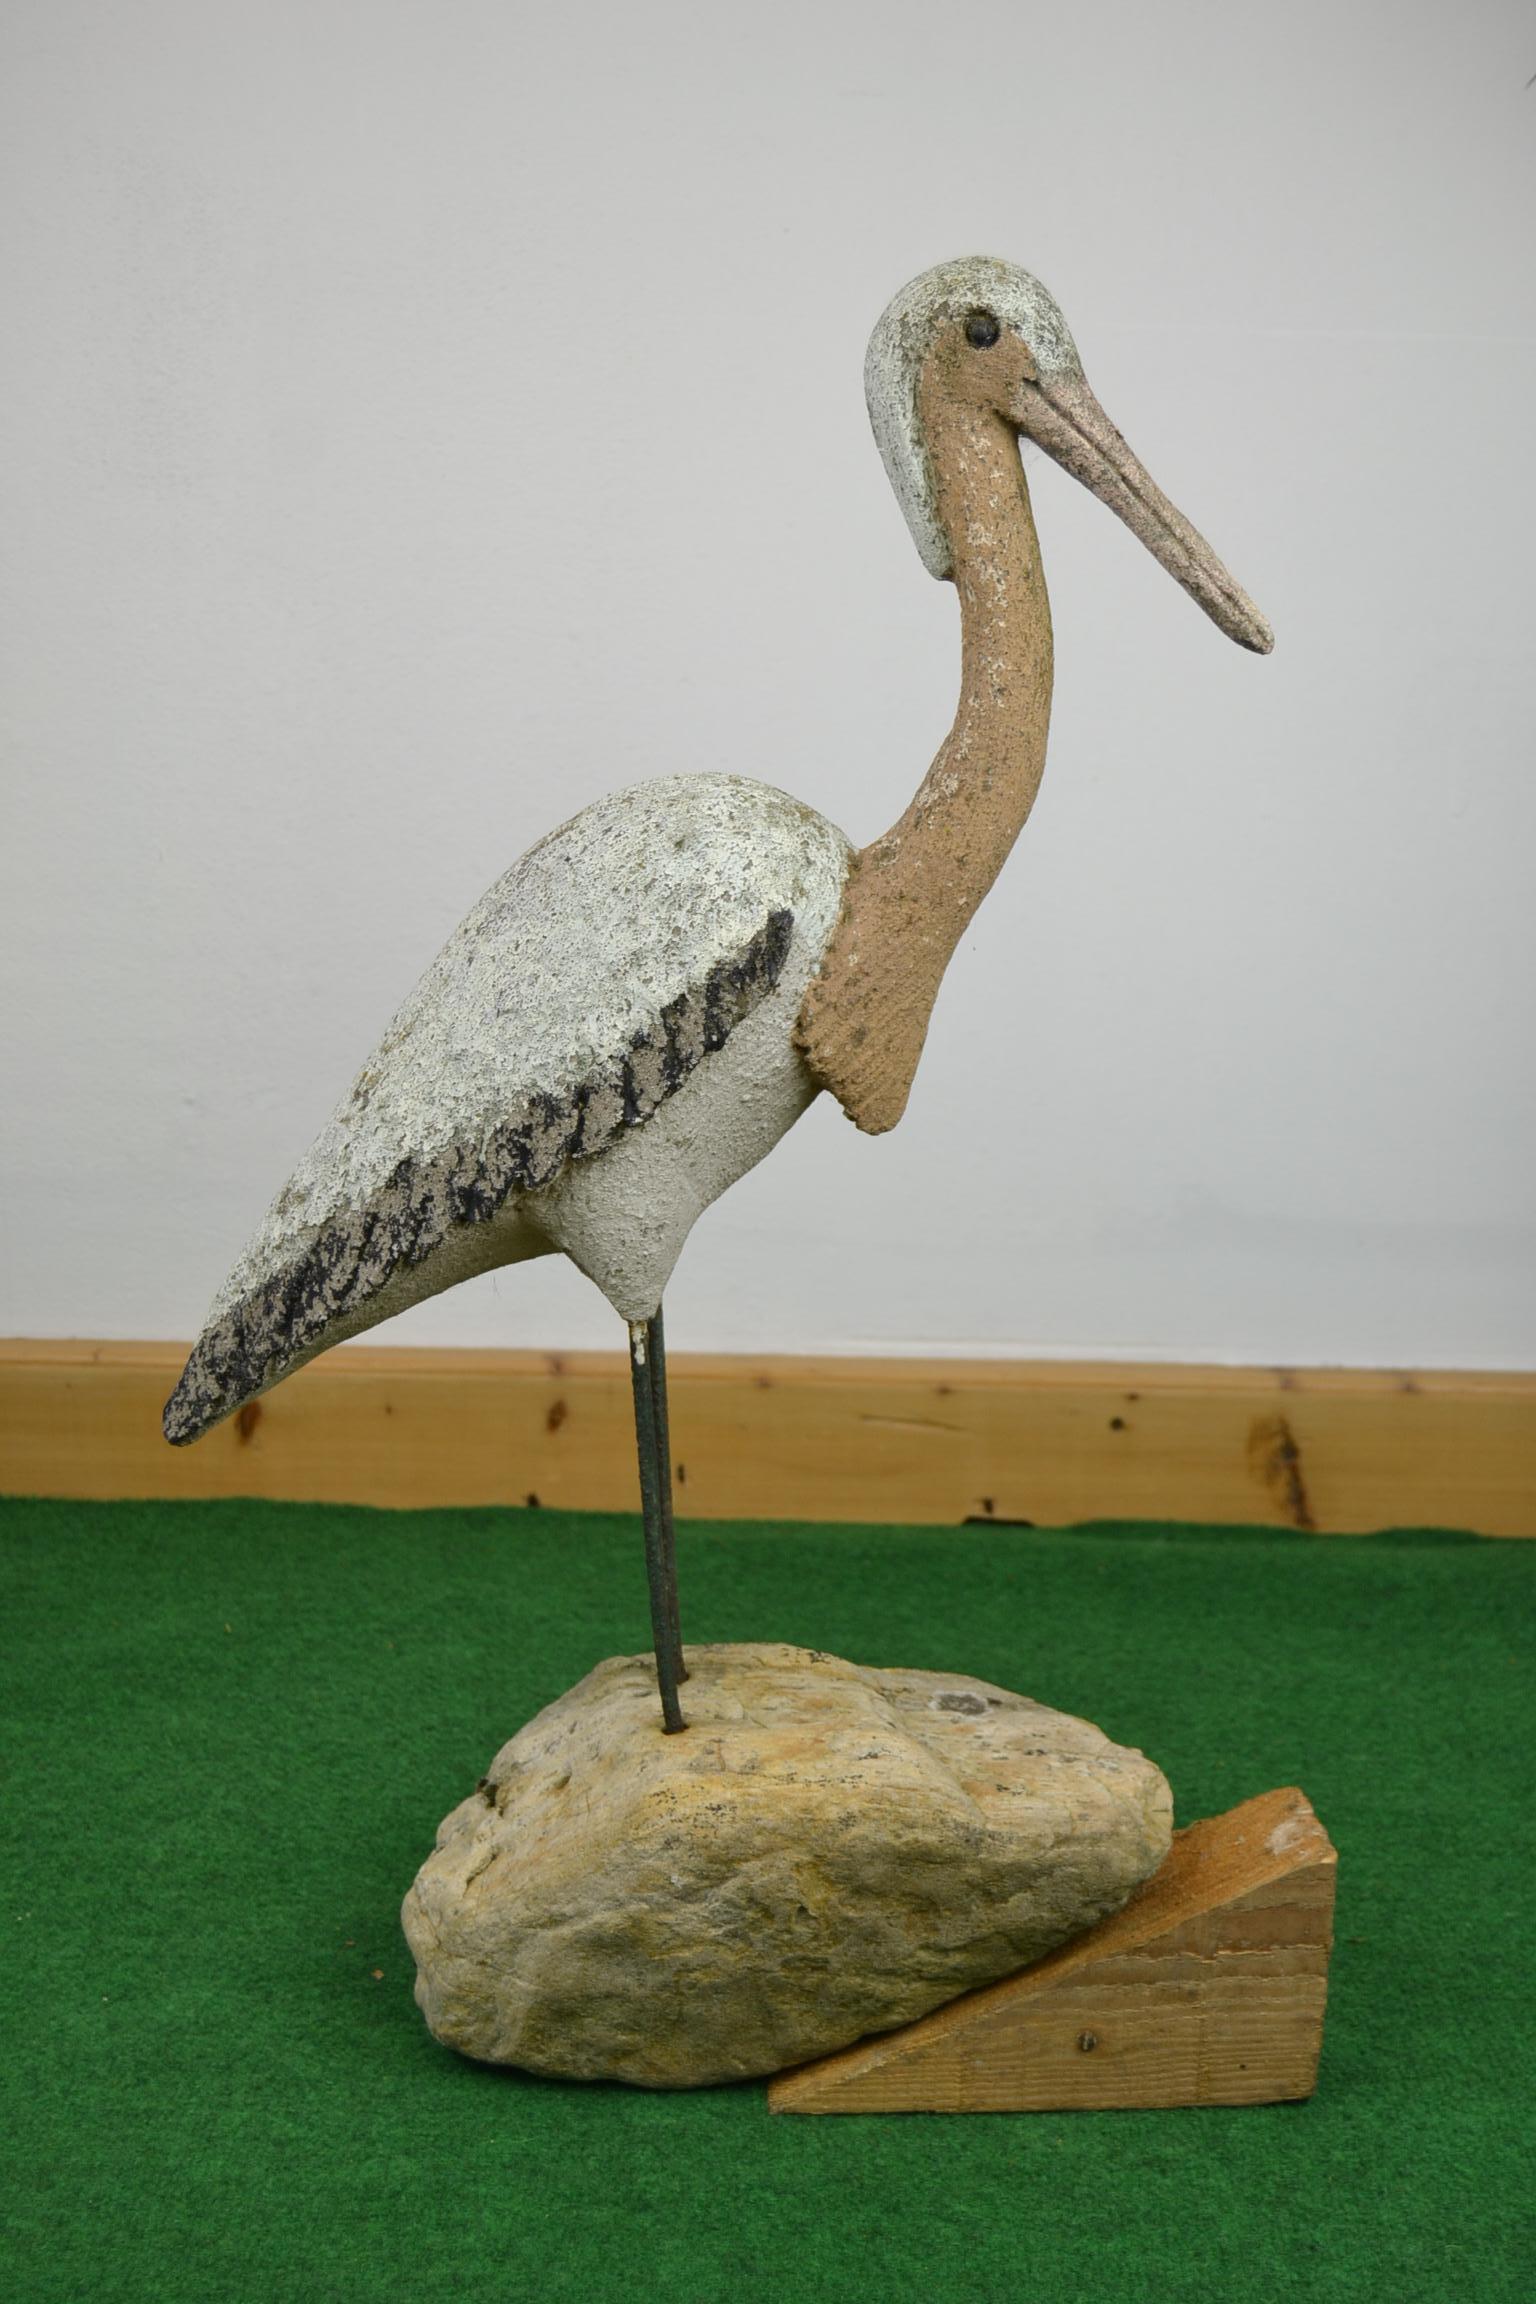 French vintage concrete bird sculpture.
This eye-catching garden sculpture in the shape of a bird is made of painted stone or painted concrete with iron legs mounted in a stone or rock. This garden bird sculpture still has his original